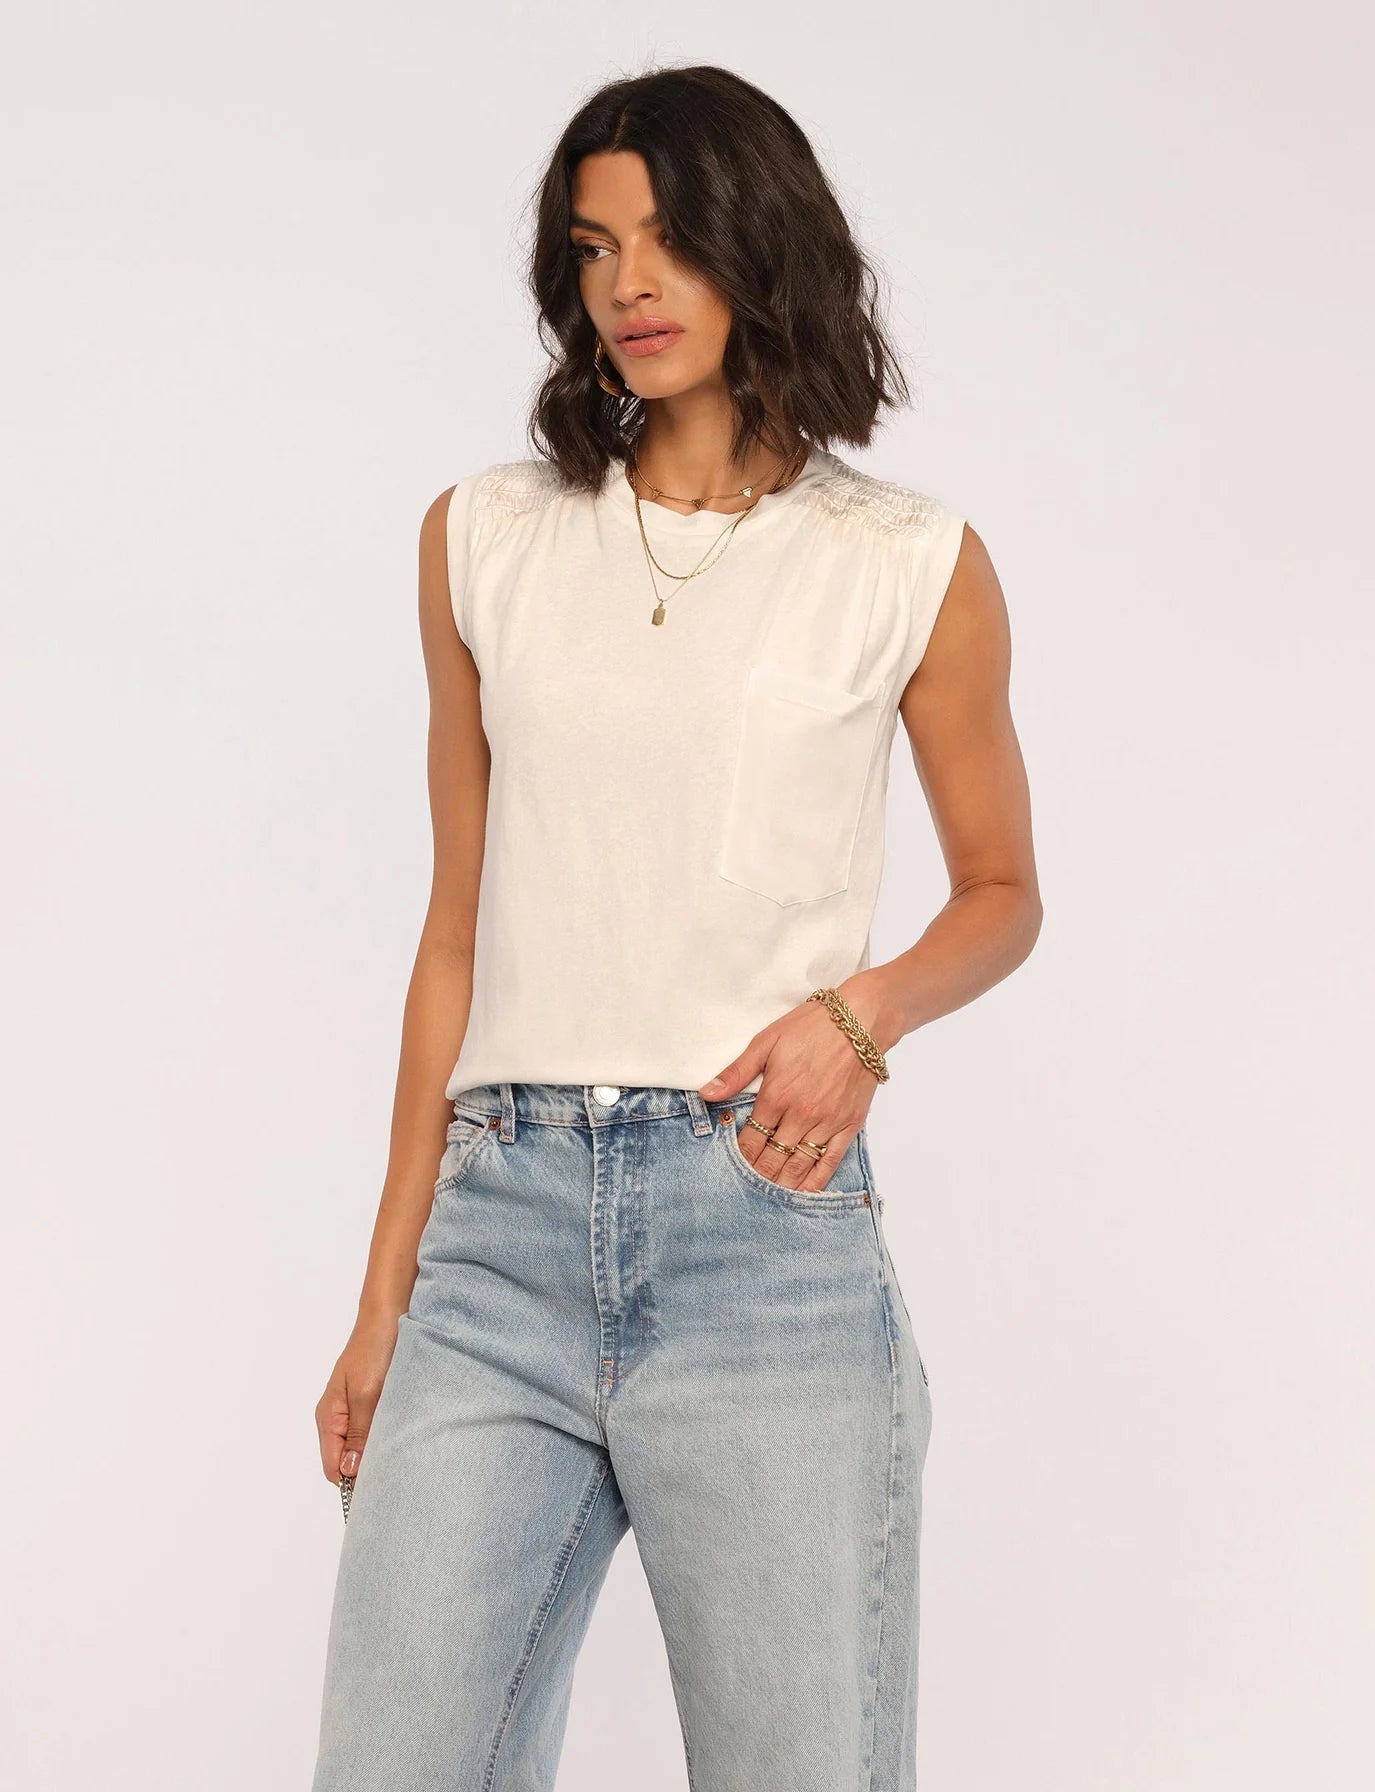 Heartloom nellie Top in White - clever alice